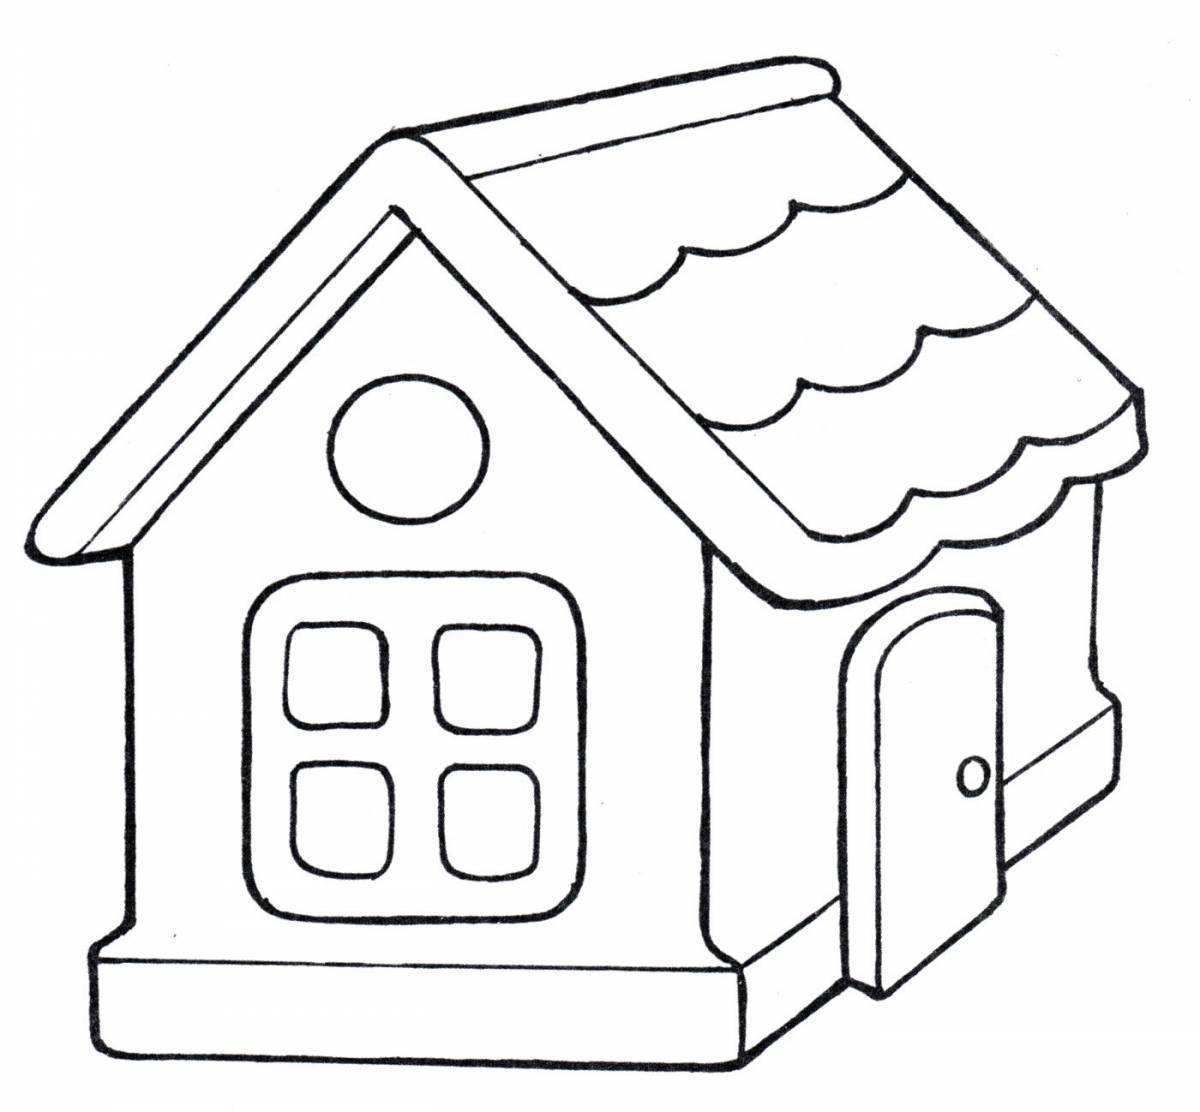 Colourful house coloring book for children 3-4 years old